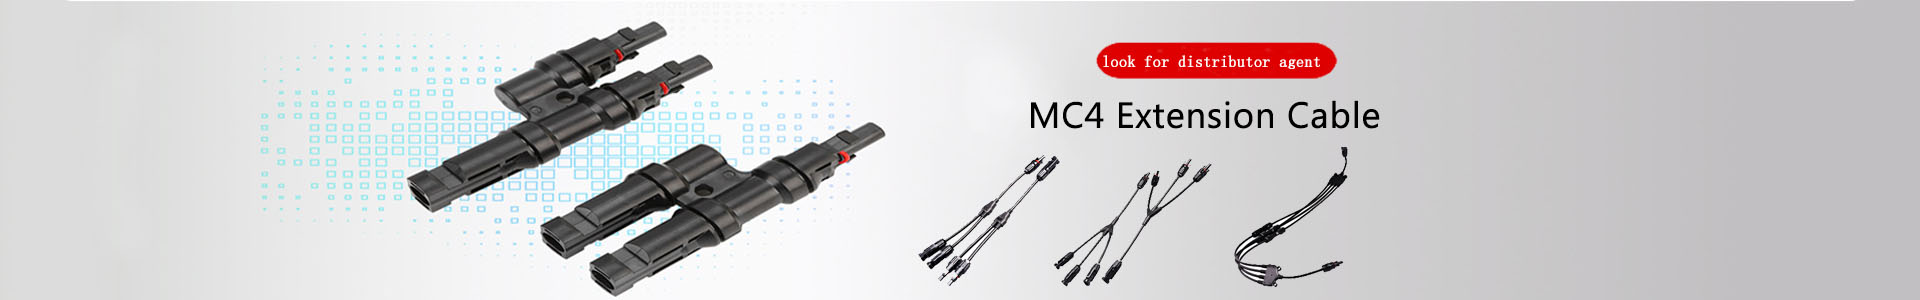 MC4 solar connector-Solar Connector-Solar | solar connector,solar branch connector,diode fuse connector,MC4 extnsion cable,H1Z2Z2 solar cable, UL4703 solar cable | Leading manufacturer and supplier of solar pv cables and connectors